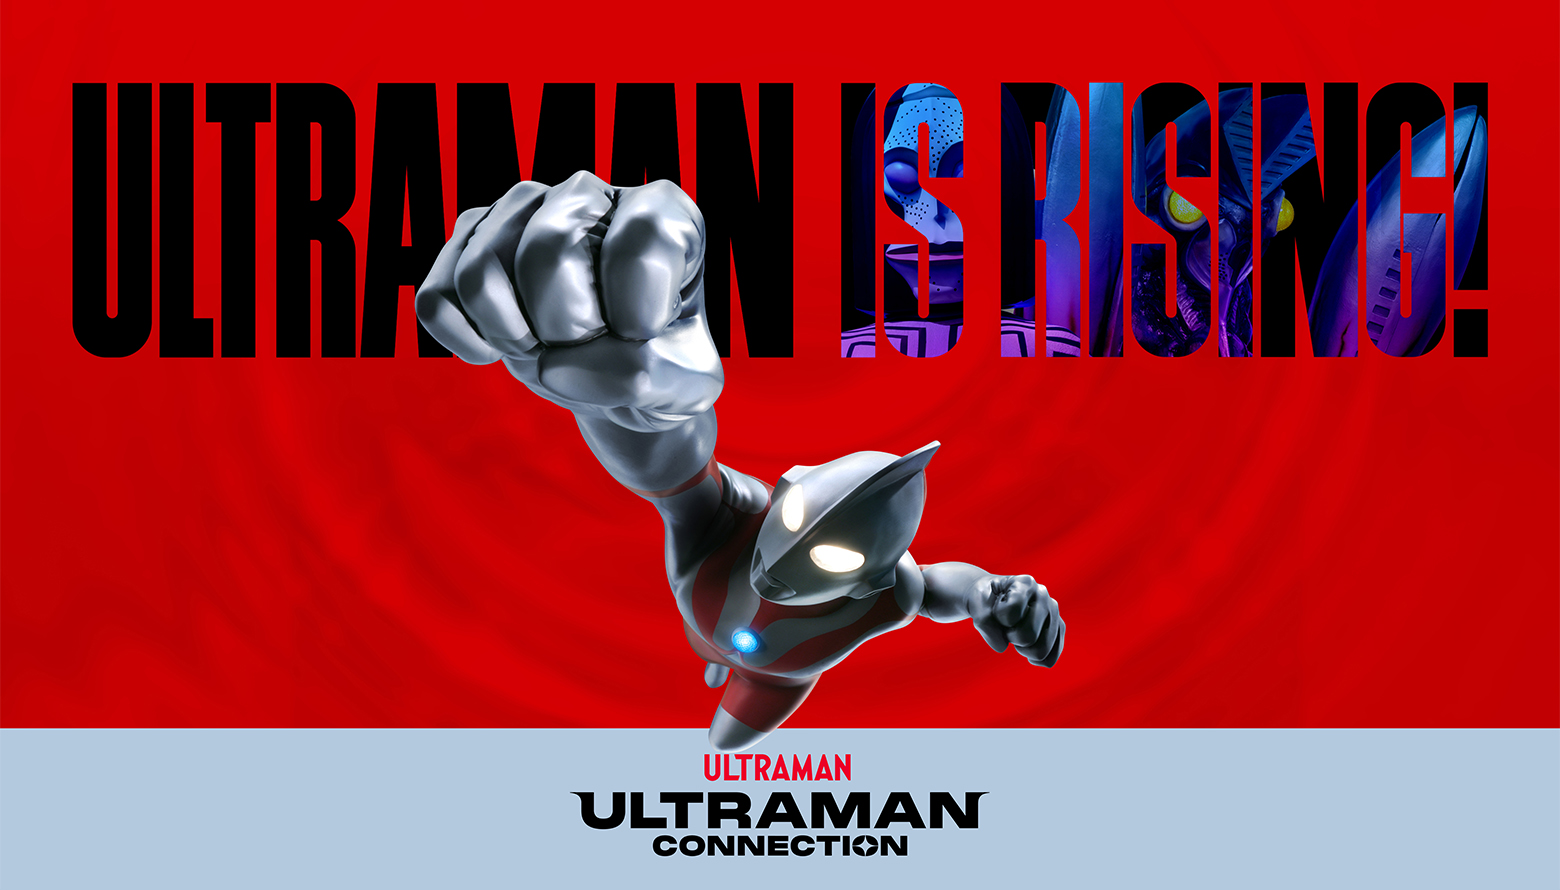 ULTRAMAN ARRIVES IN THE UNITED STATES IN PERSON FOR THE FIRST TIME IN HISTORY